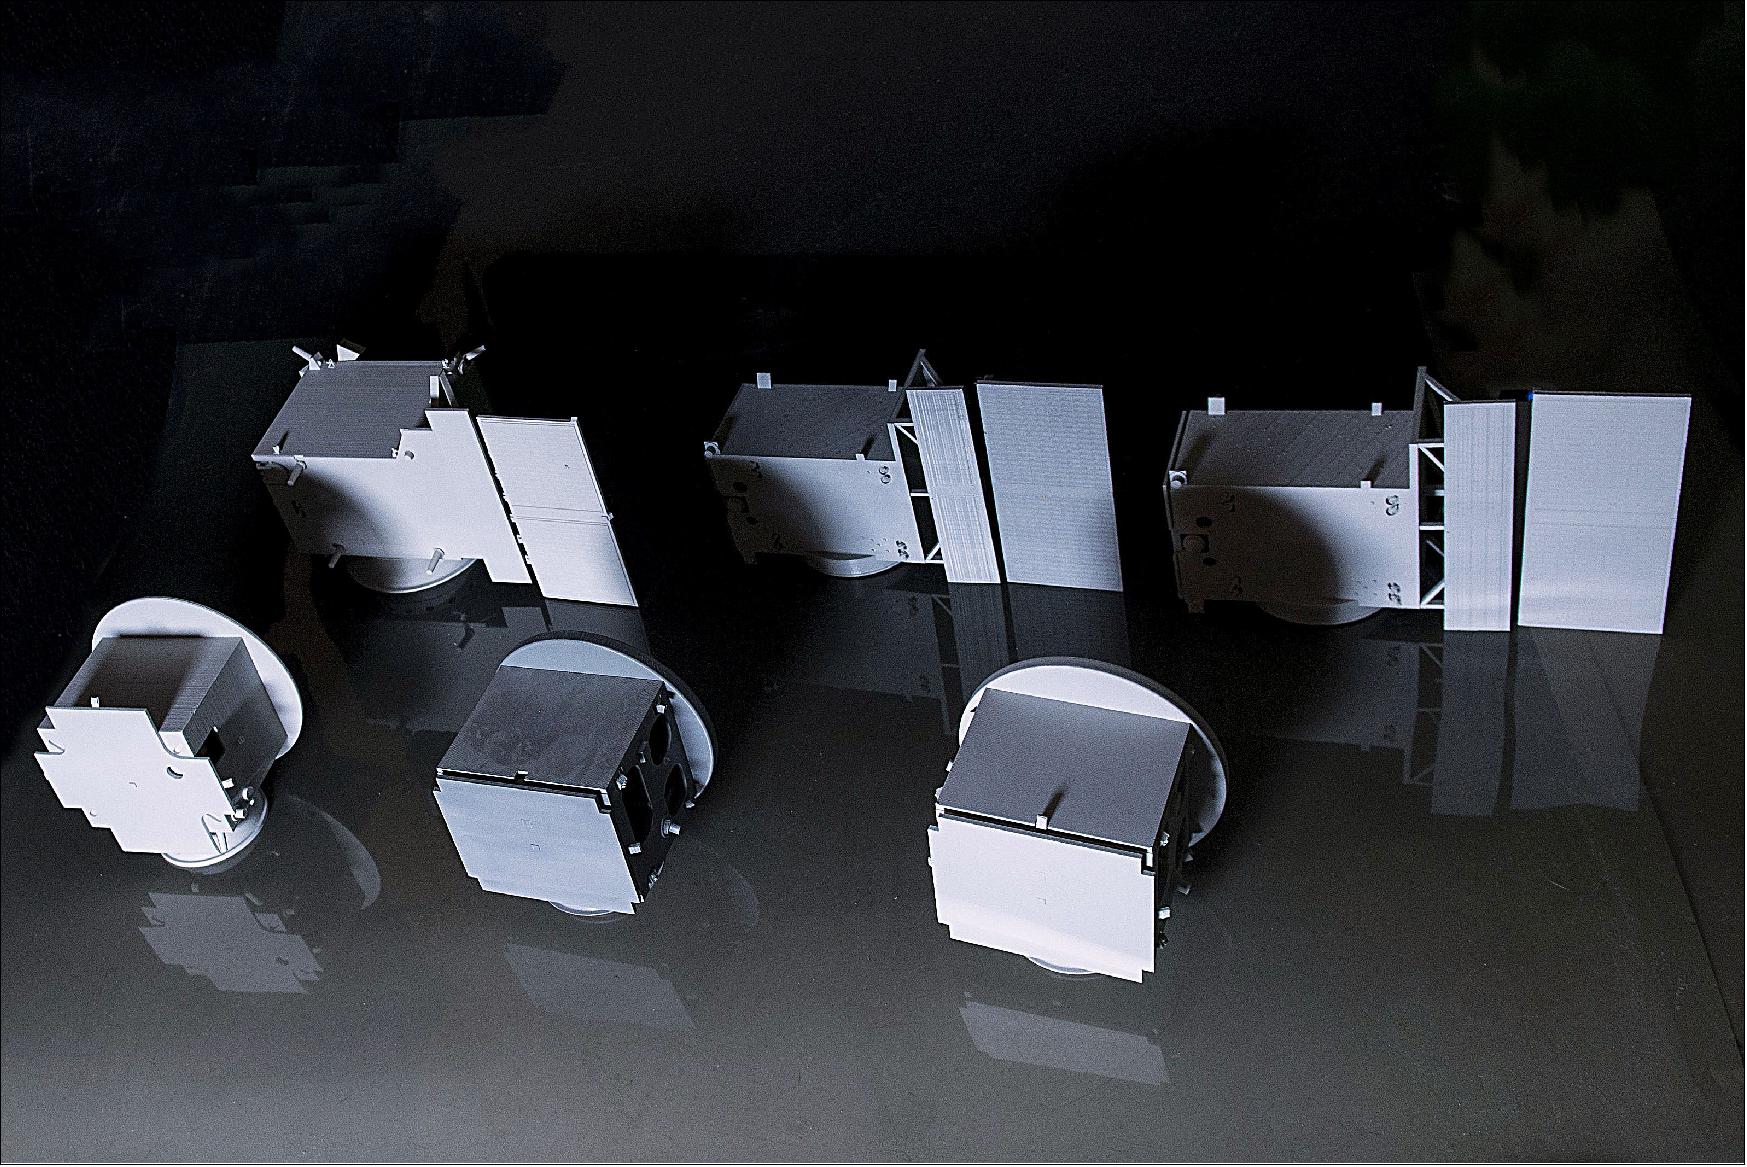 Figure 24: The design evolution of ESA’s PROBA-3 double satellite is shown by this trio of 3D-printed models, each pair – from left to right – produced after successive development milestones (image credit: ESA, G. Porter)